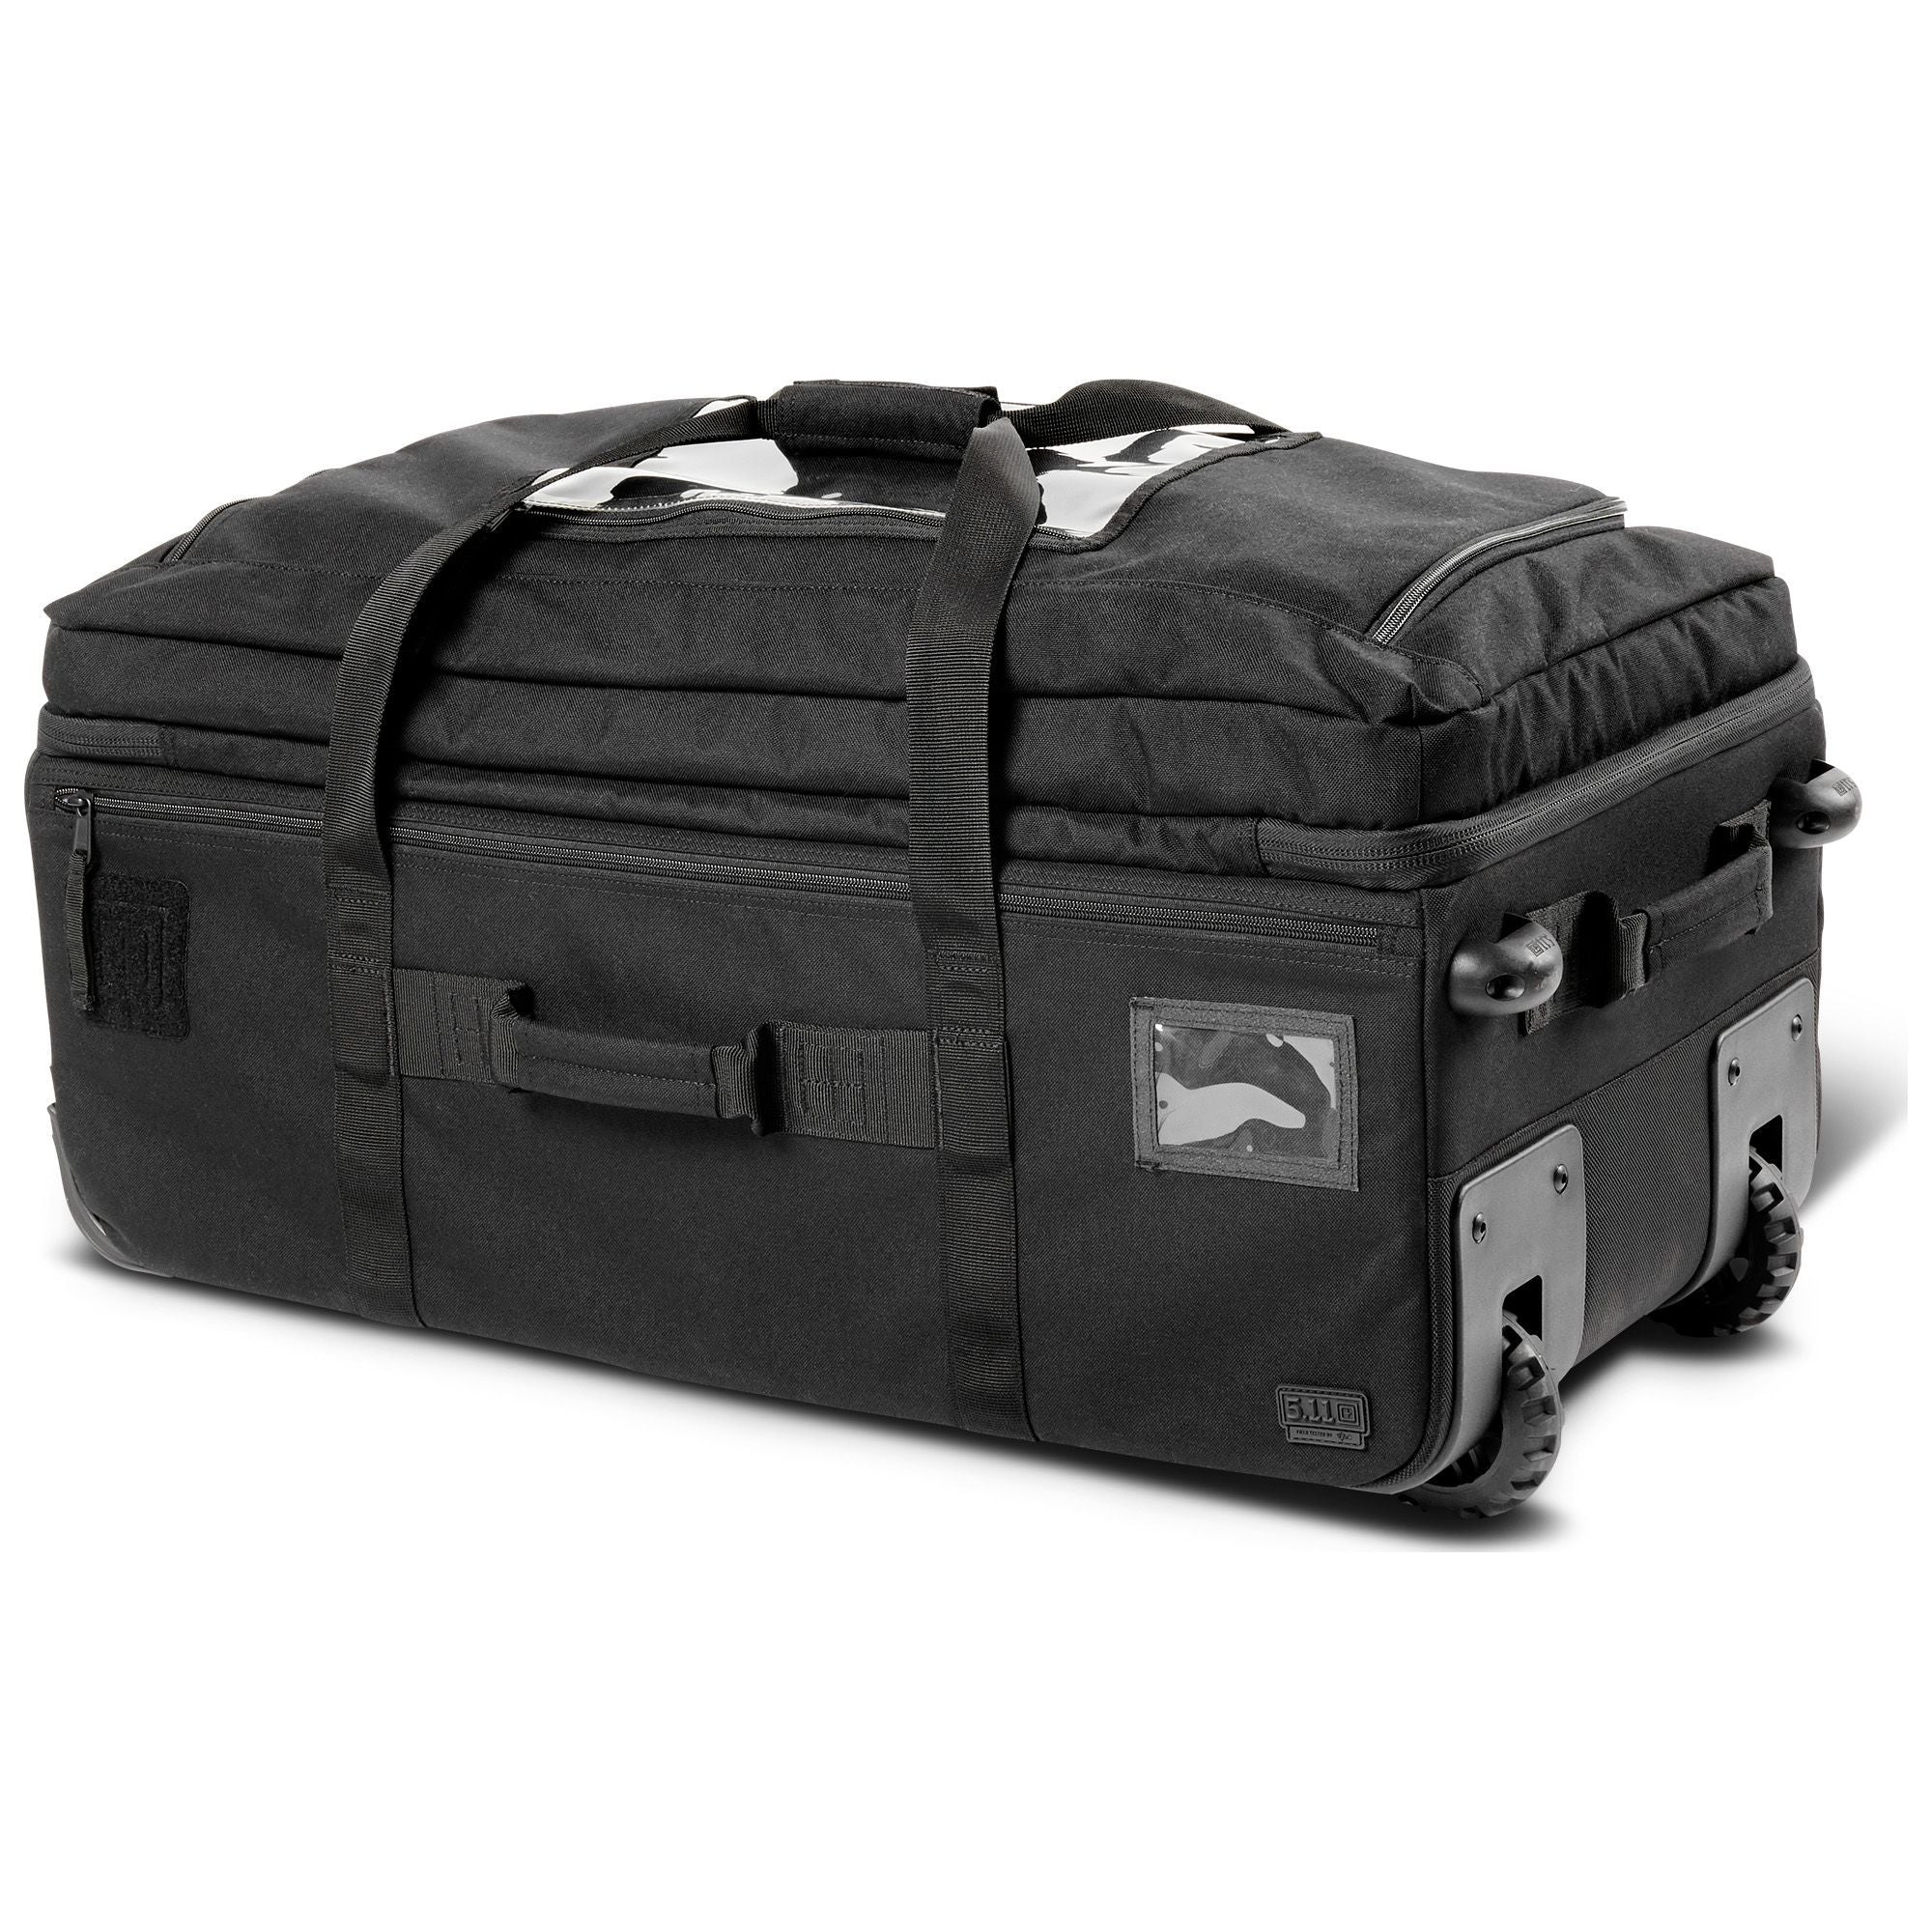 5.11 Tactical Mission Ready 3.0 Bag Bags, Packs and Cases 5.11 Tactical Tactical Gear Supplier Tactical Distributors Australia